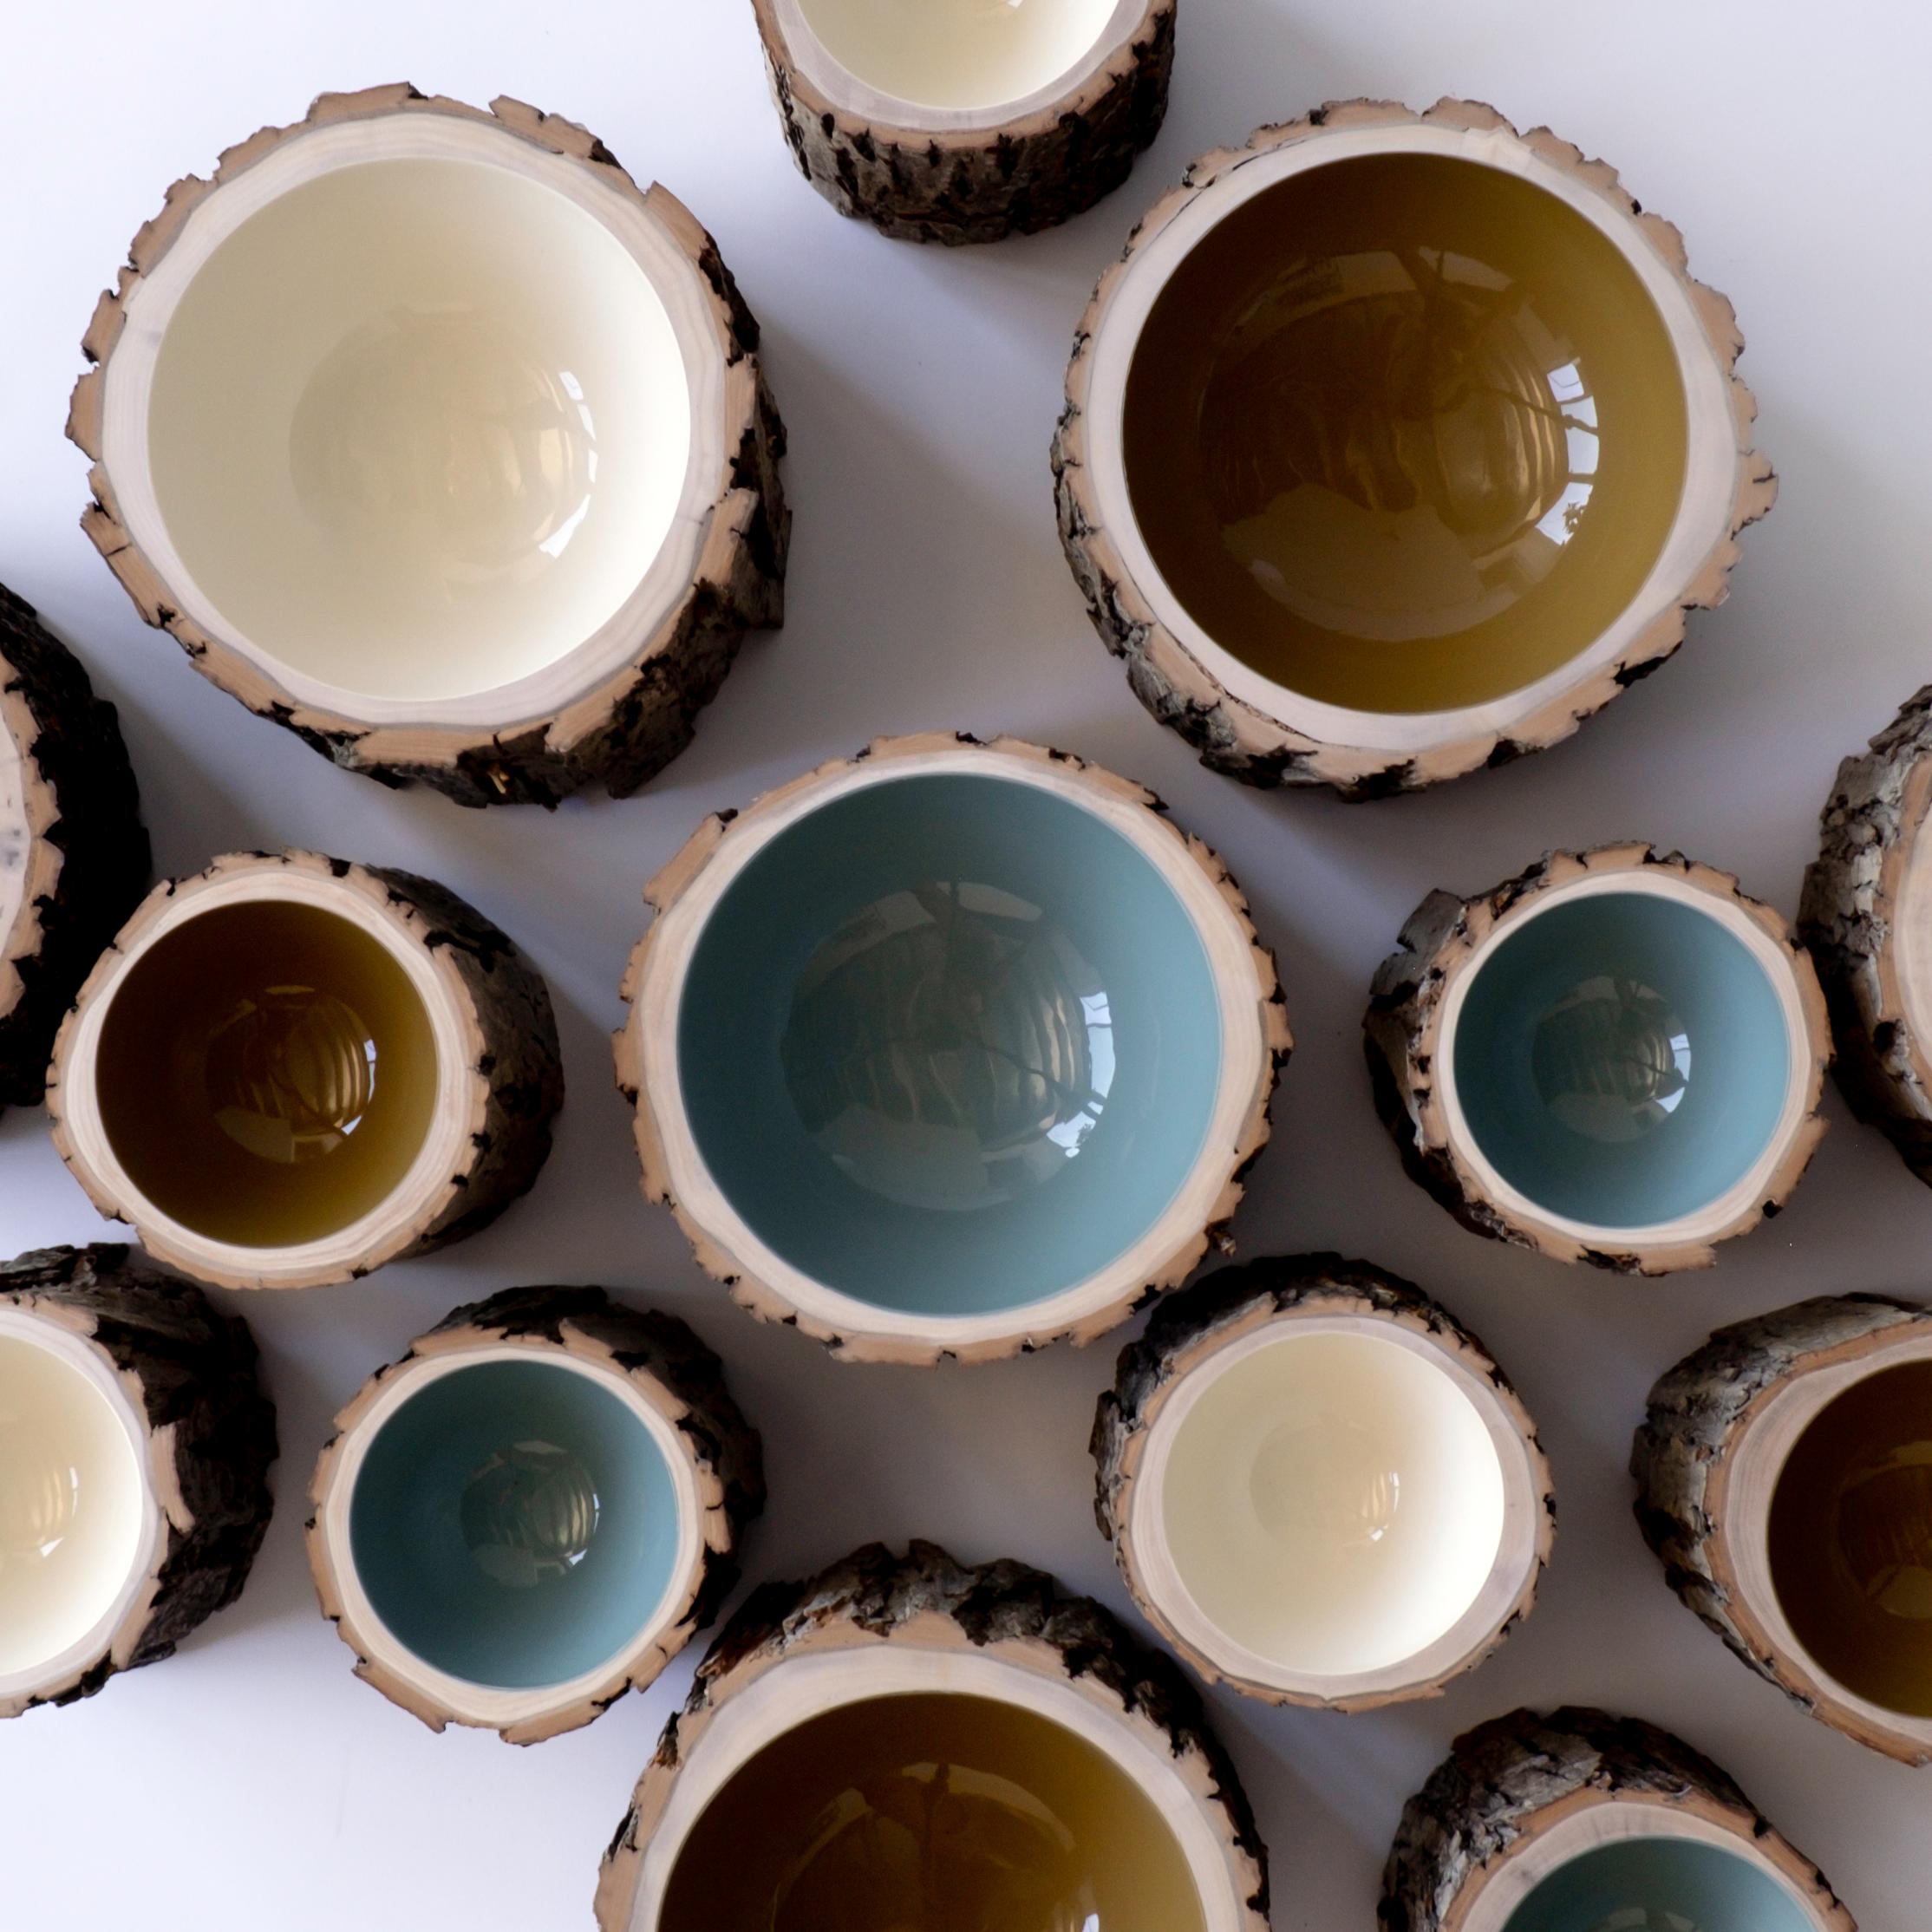 Log bowls combine the beauty of a tree in its natural state with a high-gloss, vibrant finish. Each bowl is handmade using locally reclaimed trees of all varieties (fallen or cut down due to infrastructure or inclement weather). The trees are hand